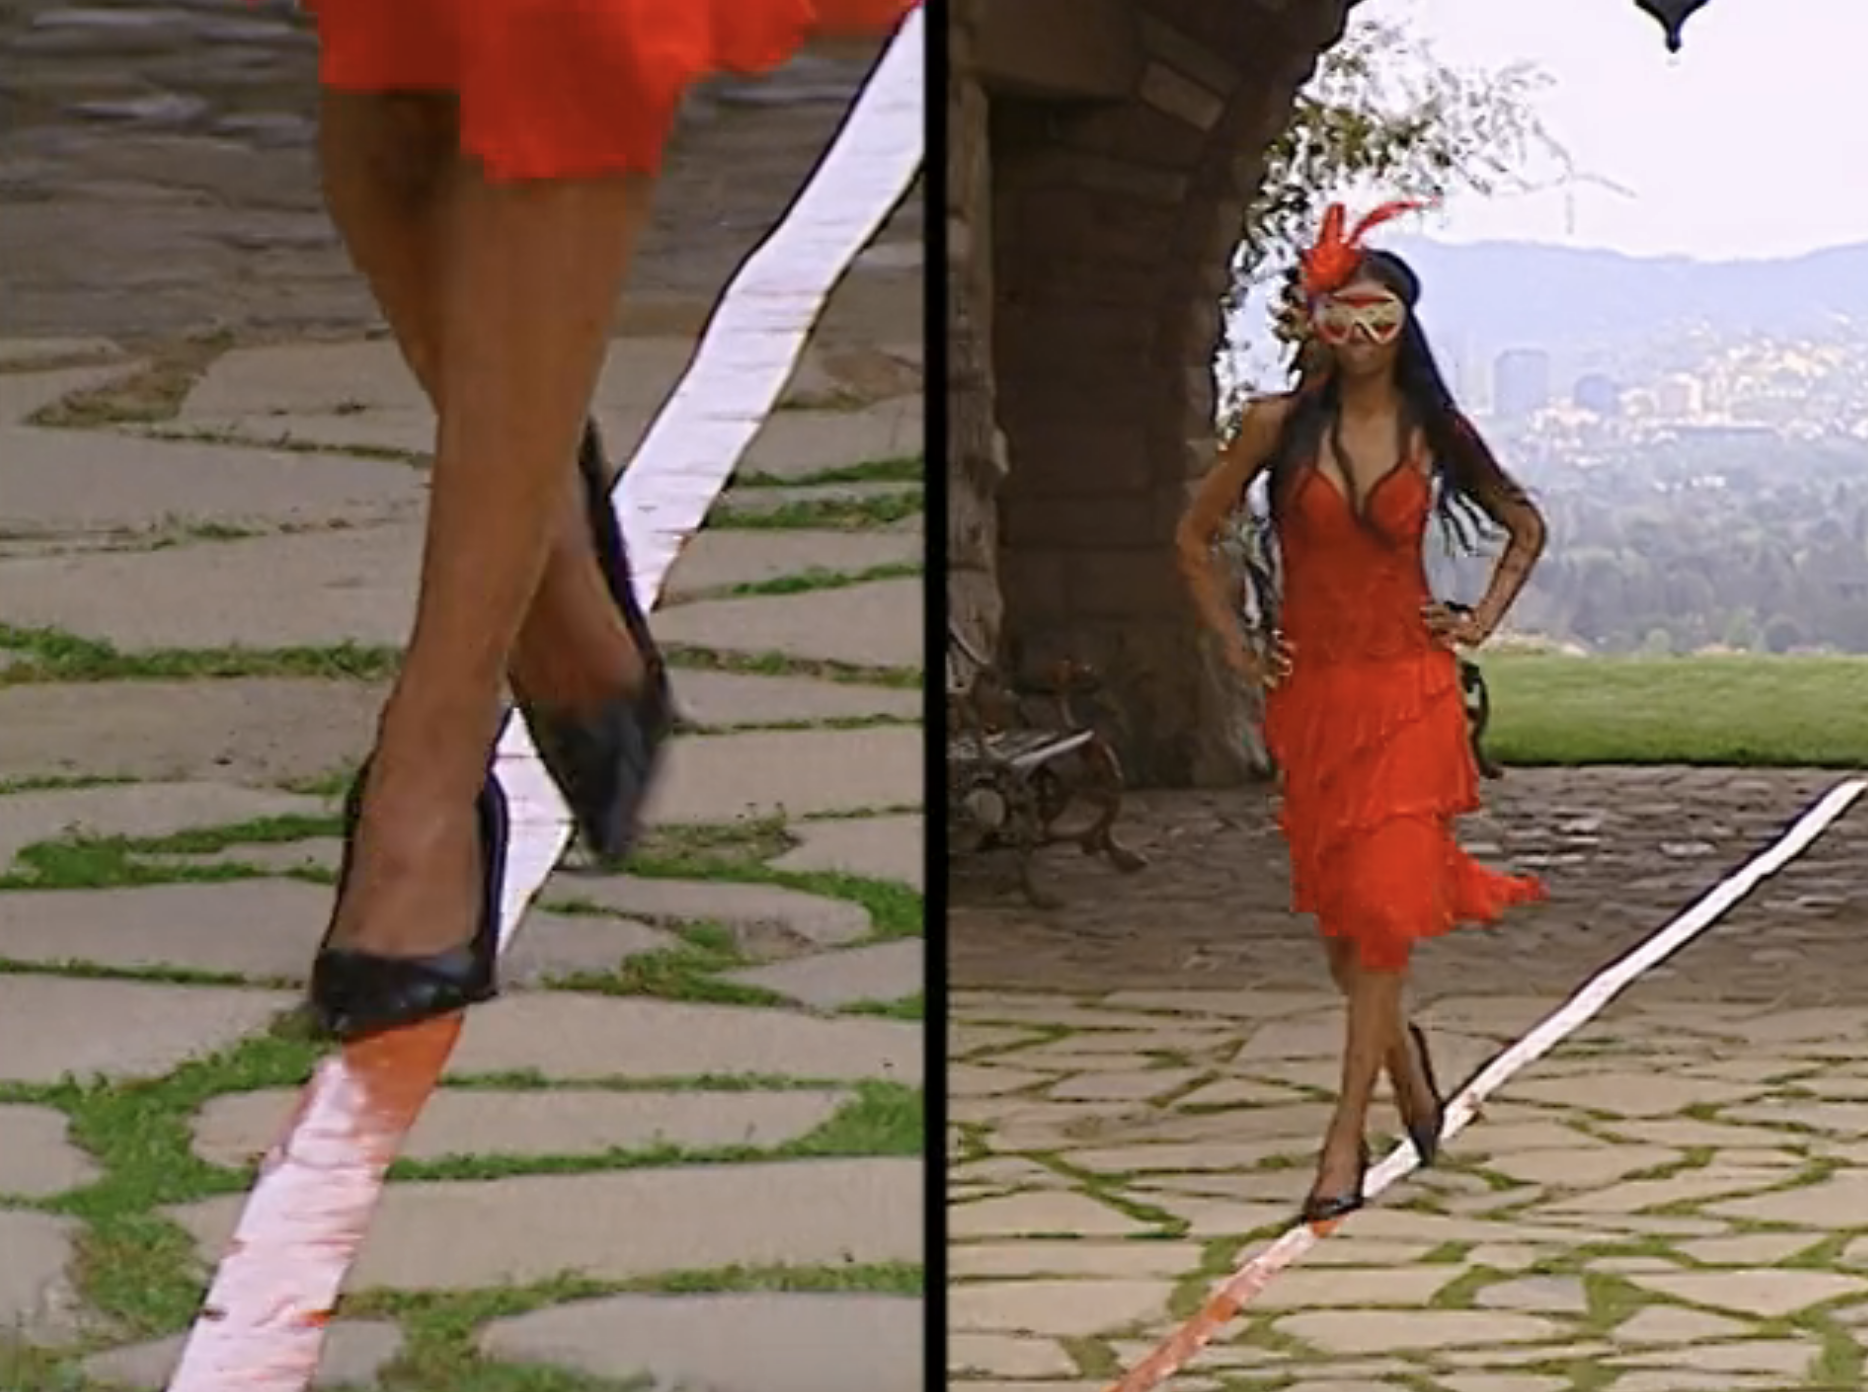 A contestant walks on cobblestone in heels and a masquerade mask